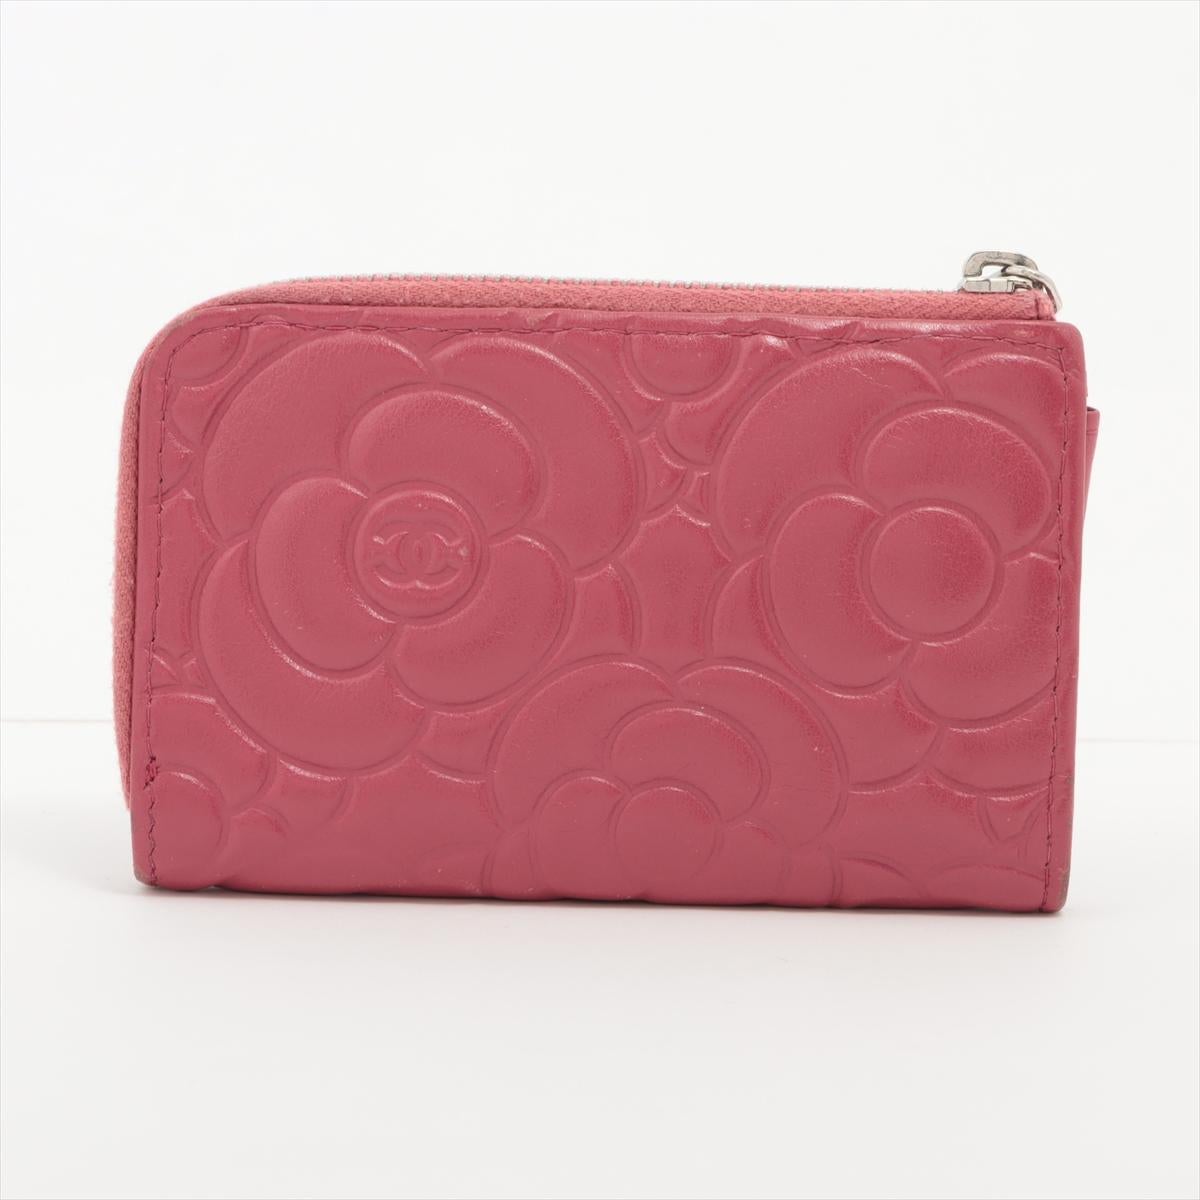 Chanel Camelia Leather Coin Case Fushcia In Good Condition For Sale In Indianapolis, IN